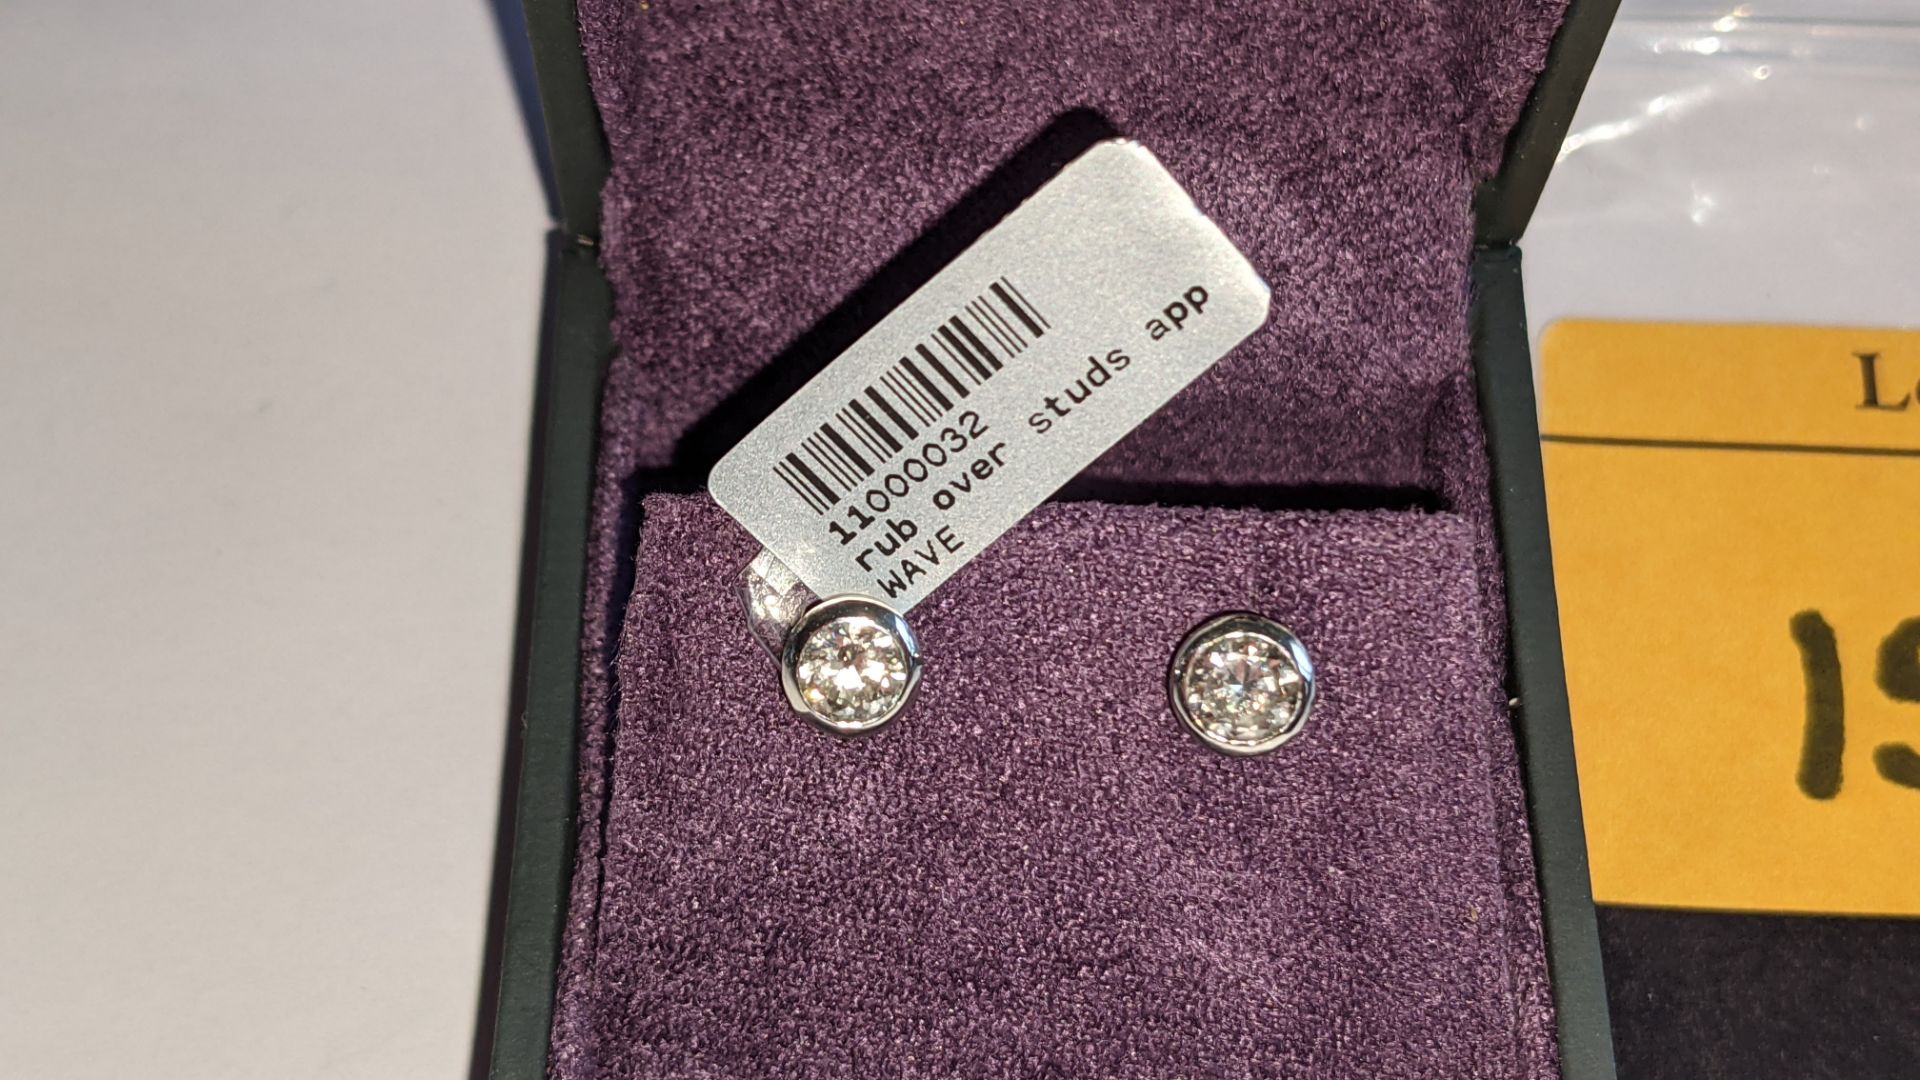 Pair of Platinum 950 & diamond earrings with total ctw of approx. 0.70ct RRP £3,659 - Image 10 of 10